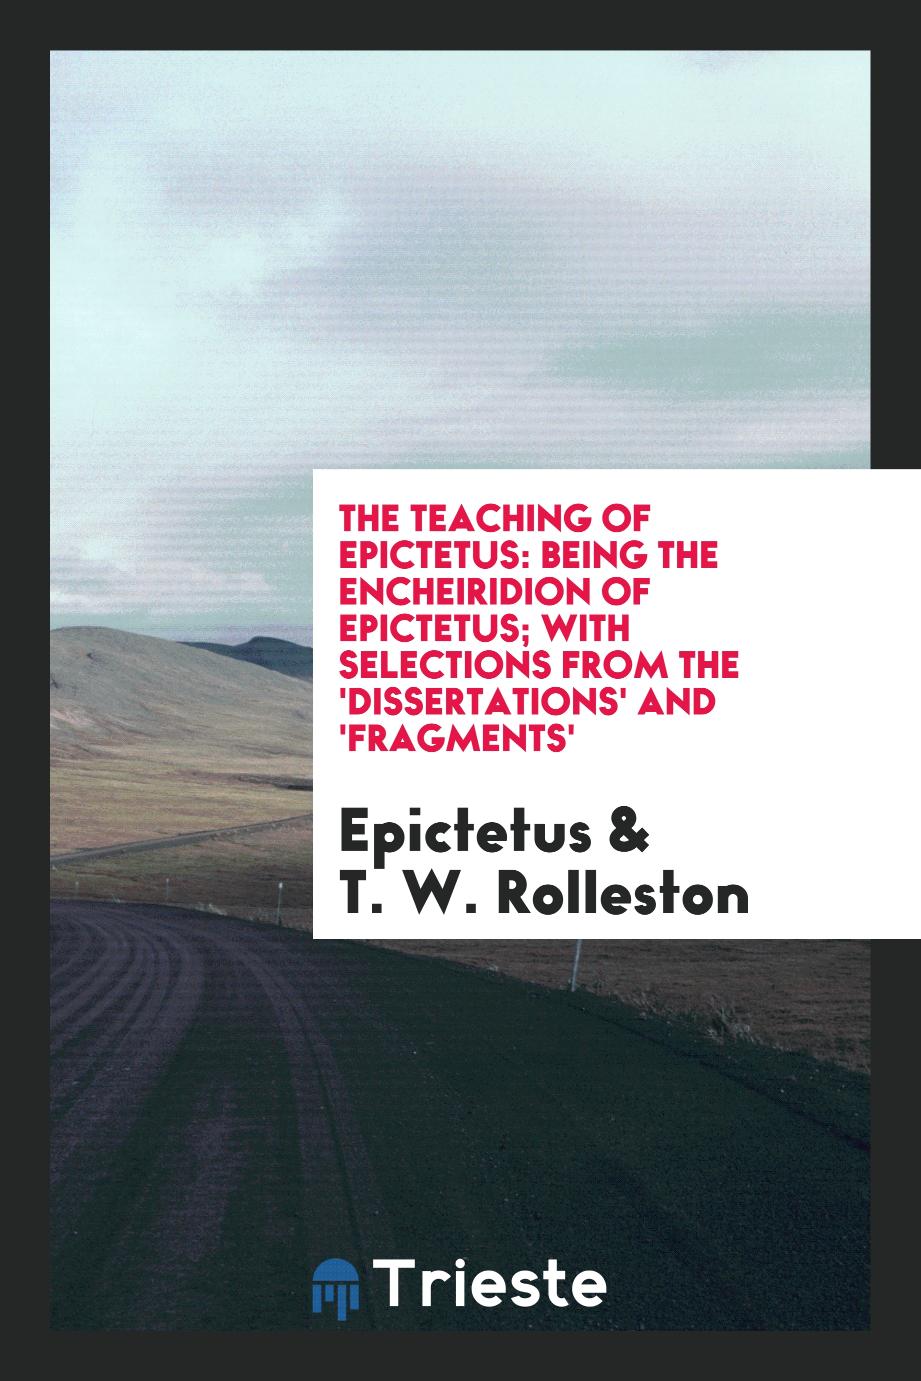 The teaching of Epictetus: being the Encheiridion of Epictetus; with selections from the 'Dissertations' and 'Fragments'